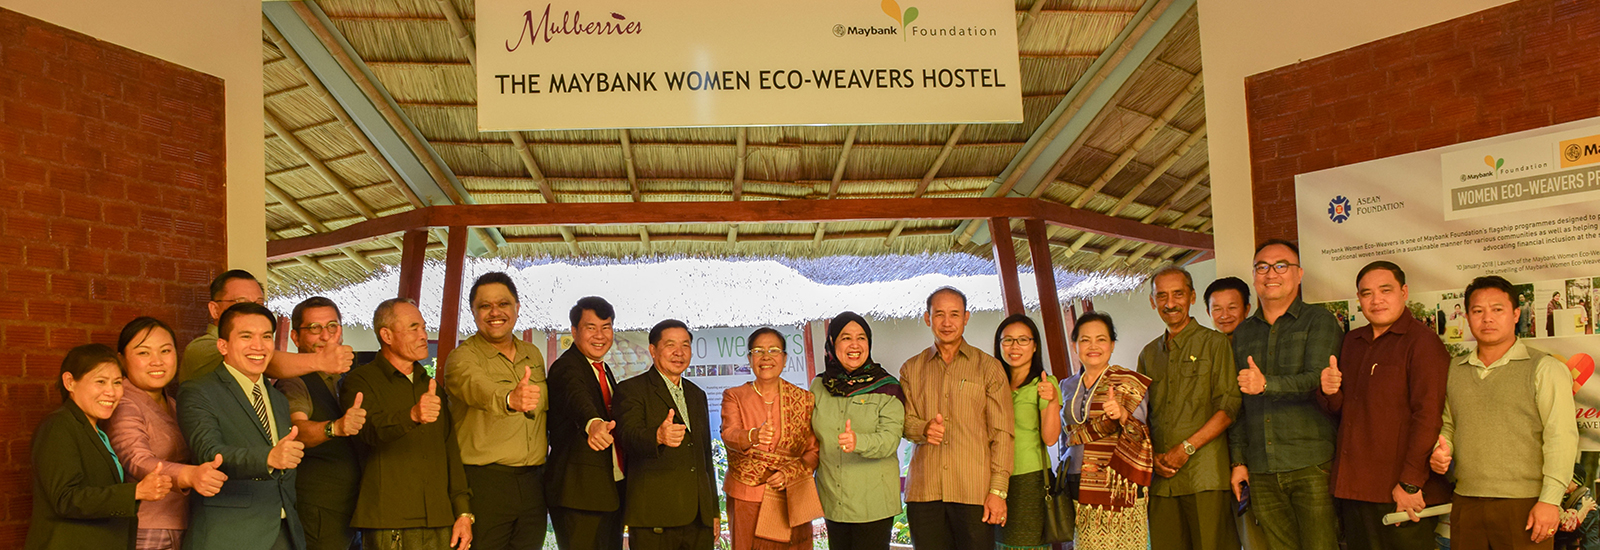 Maybank Foundation Expands Silk Weaving Centre in Laos